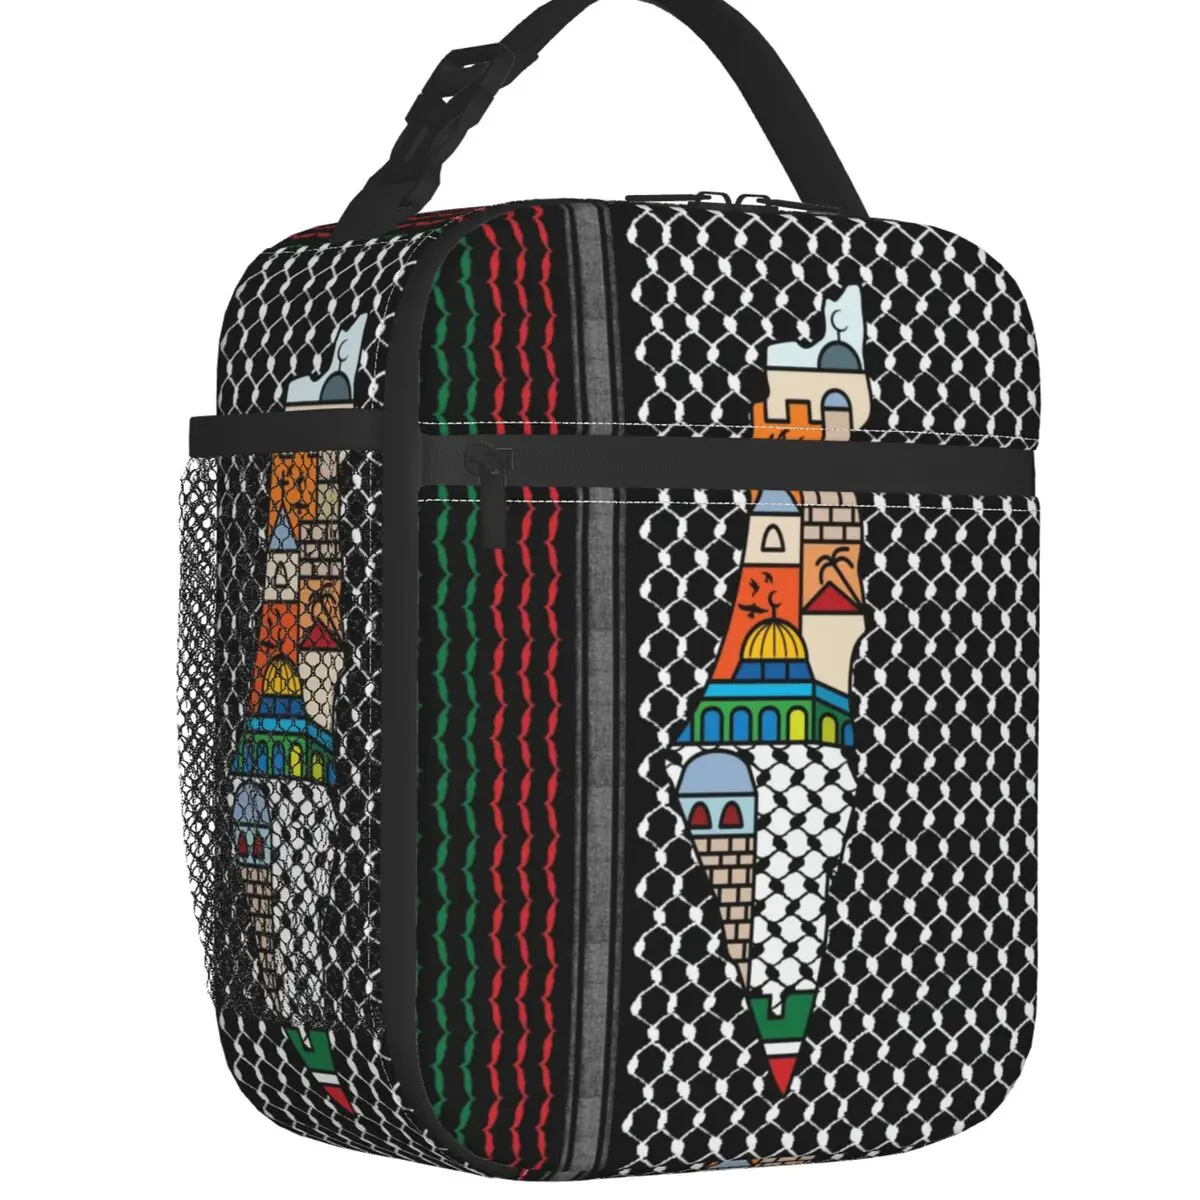 Palestinian Map With Kufiya Hatta Lunch Boxes Multifunction Palestine Jerusalem Cooler Thermal Food Insulated Lunch Bag School